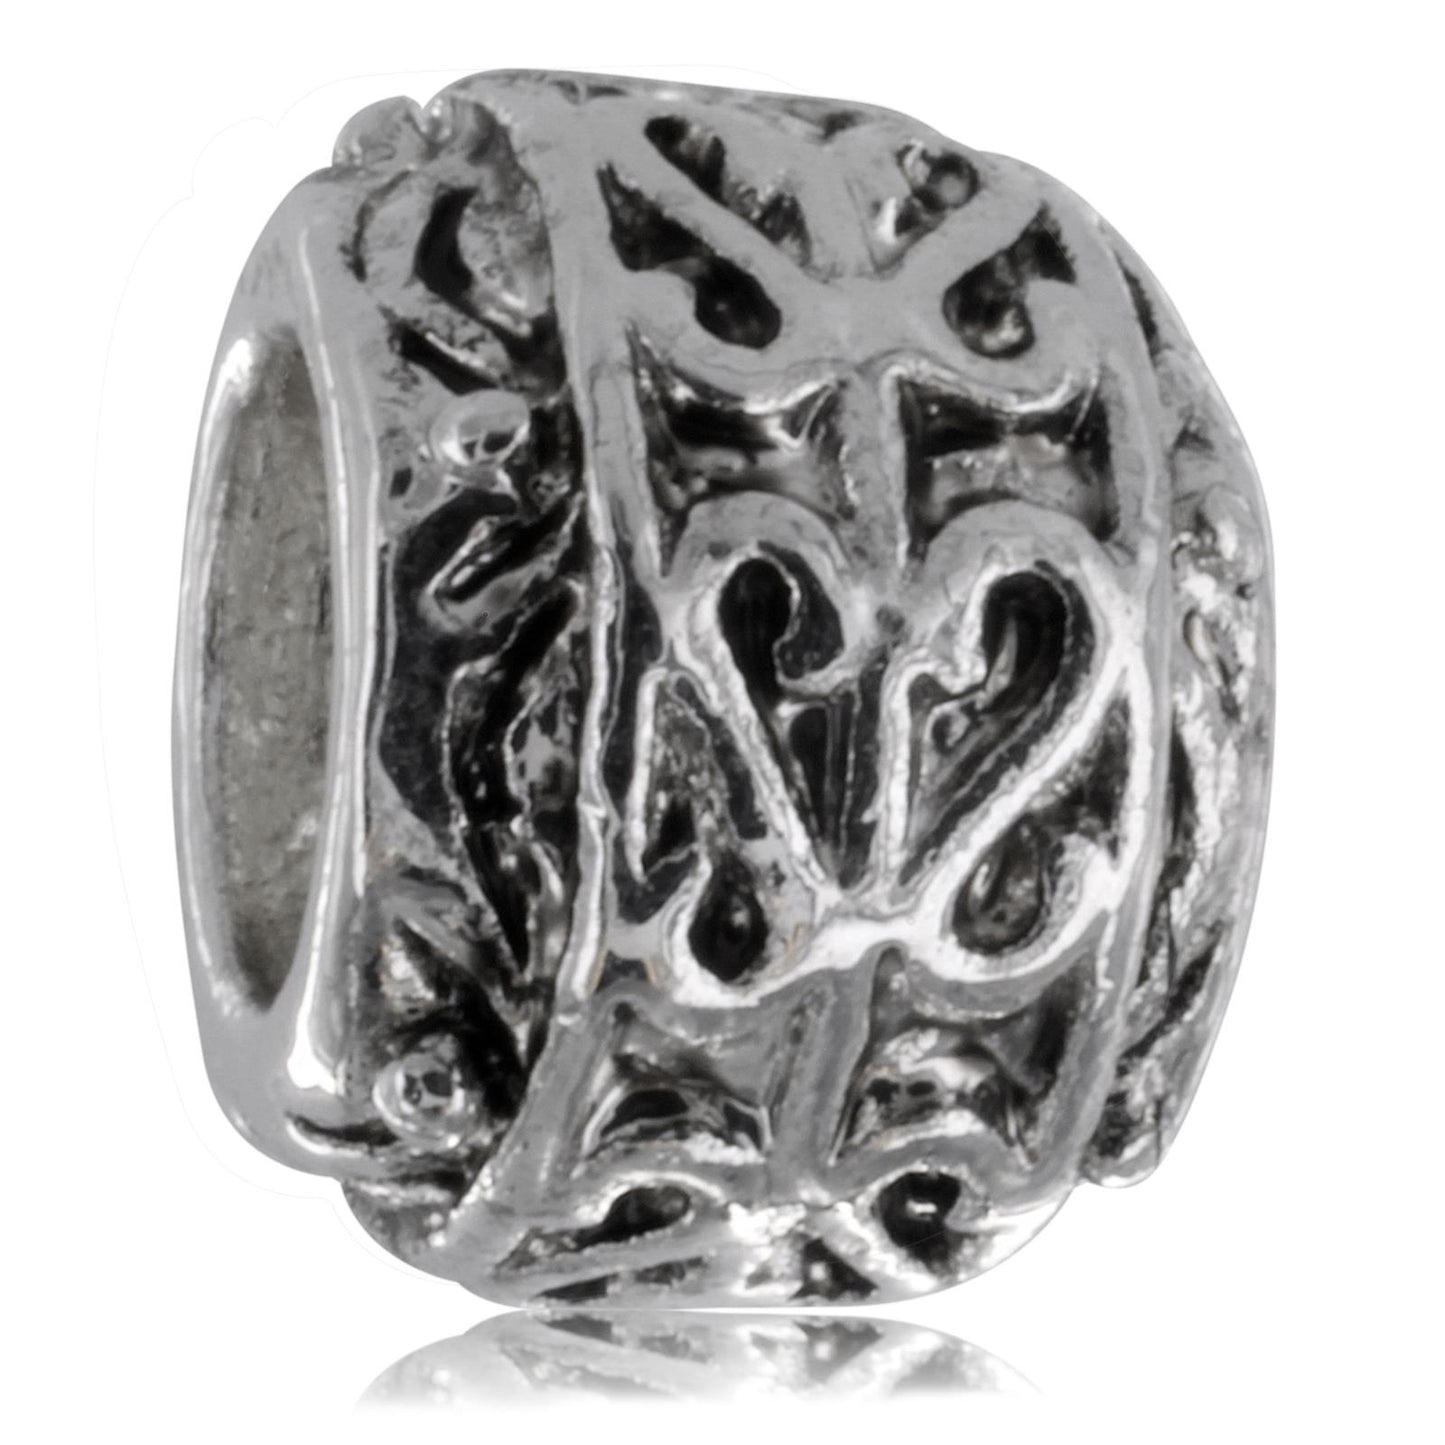 Silver Plated Heart Bead with Intricate Design